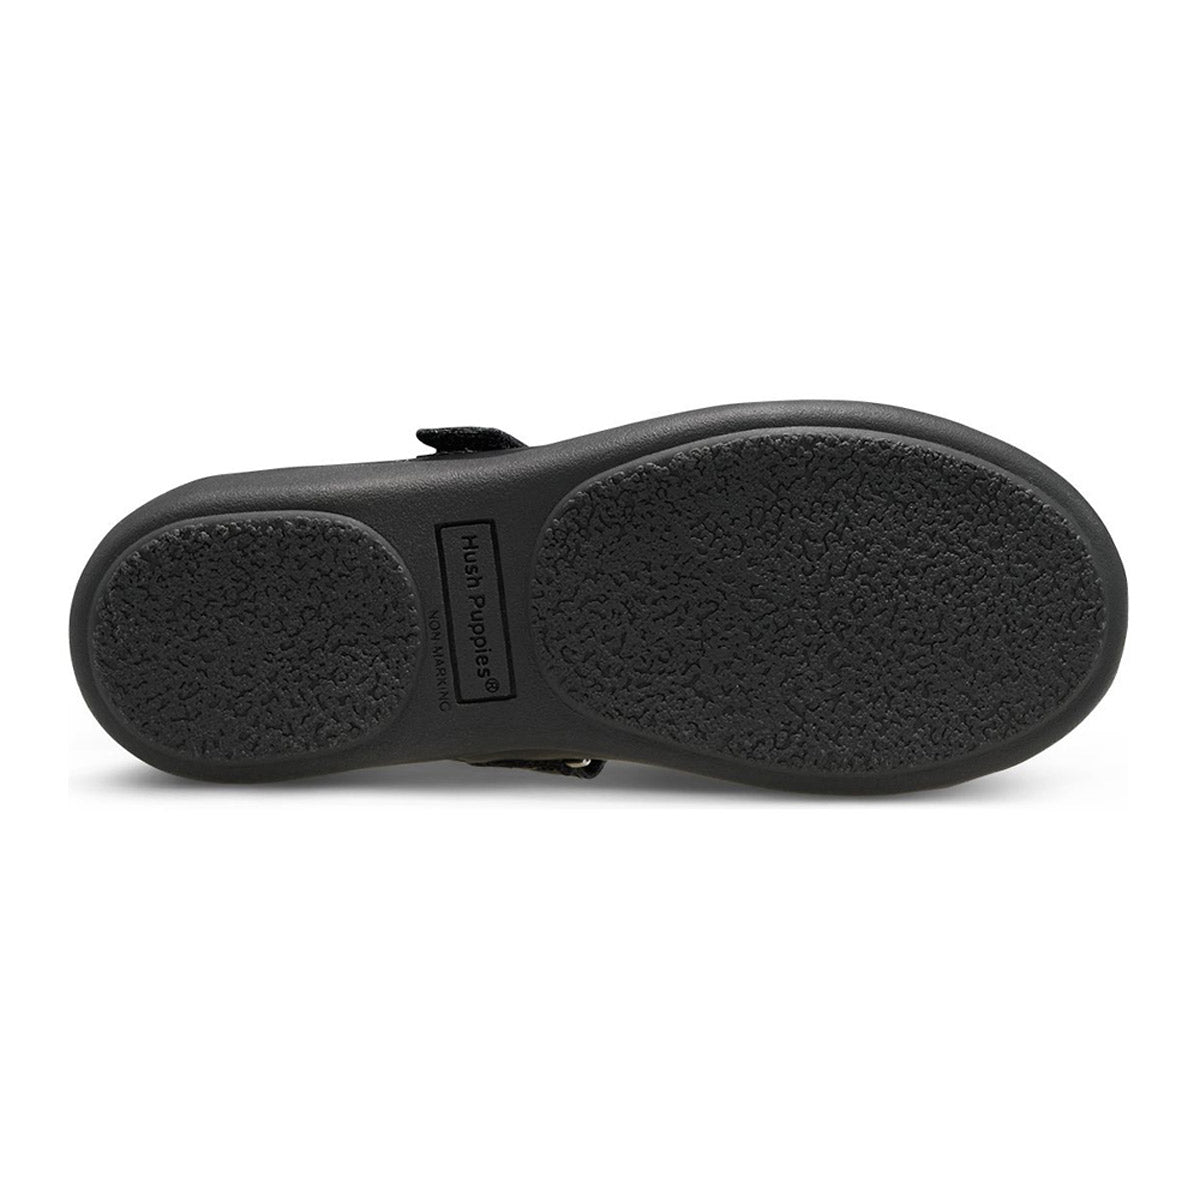 The Hush Puppies Lexi Black Leather school uniform shoe sole displayed against a white background.